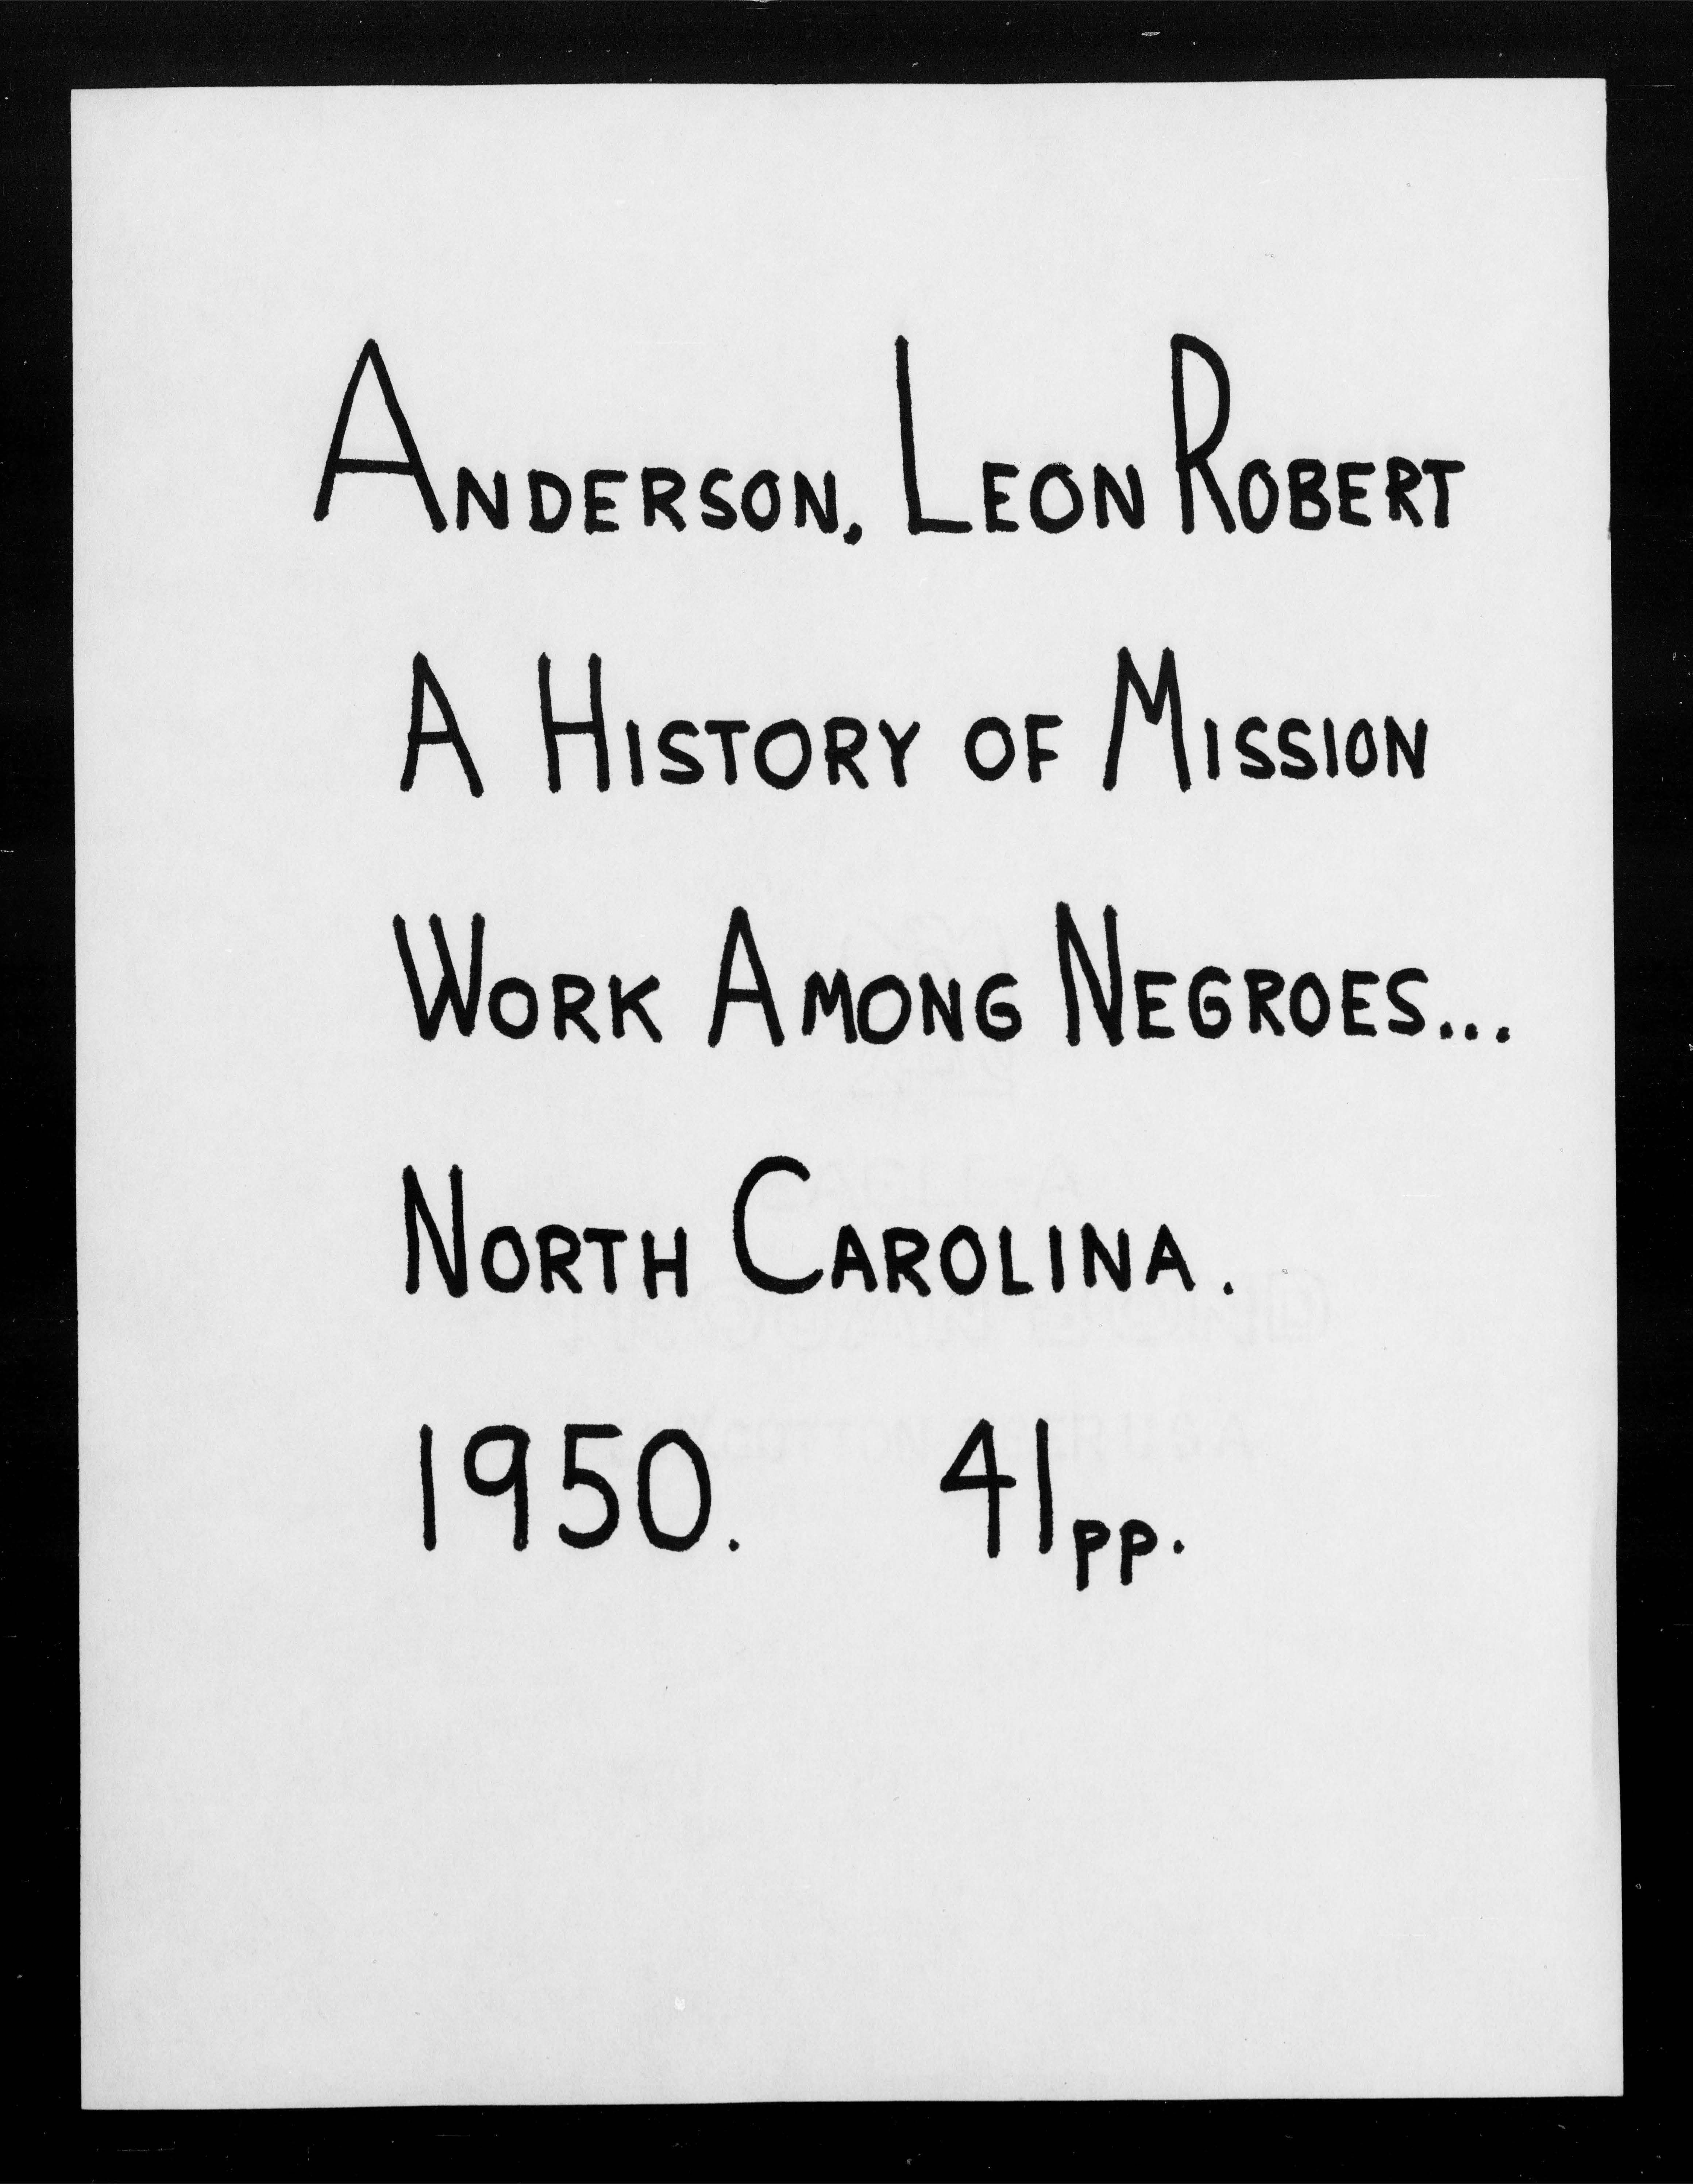 A History of Mission Work Among Negros in the Charlotte, North Carolina Area of the Mecklenburg Presbytery.